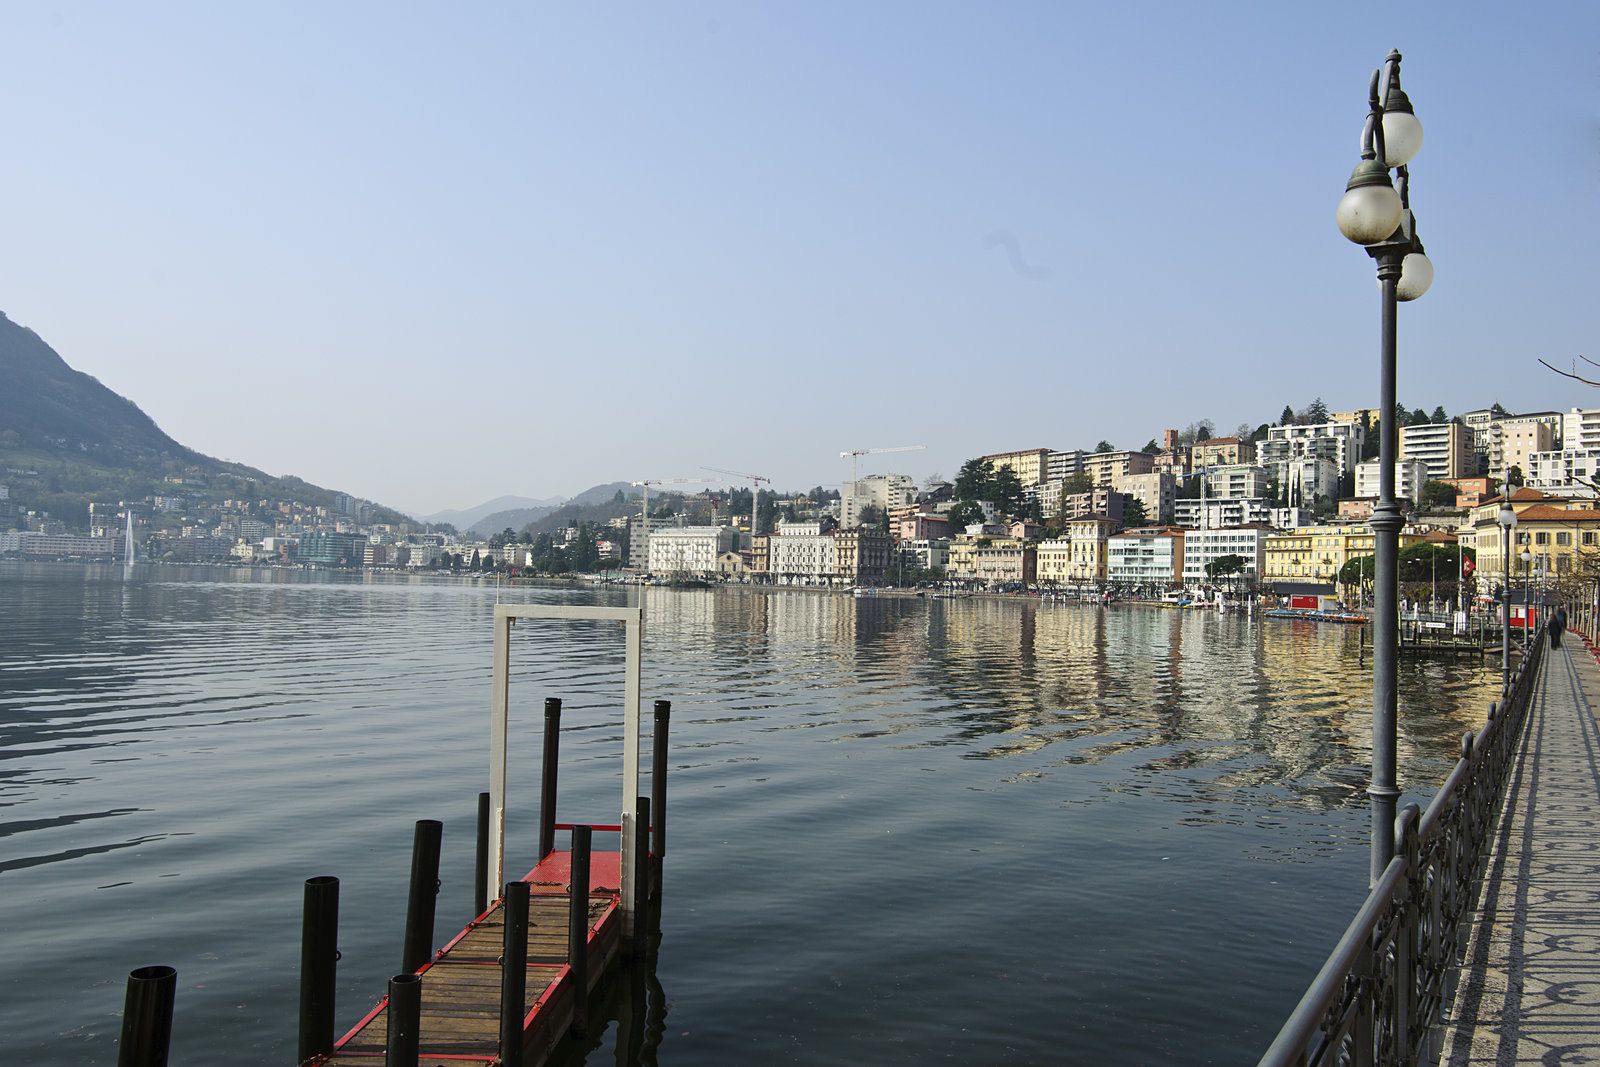 Top 10 things to see and do in Lugano